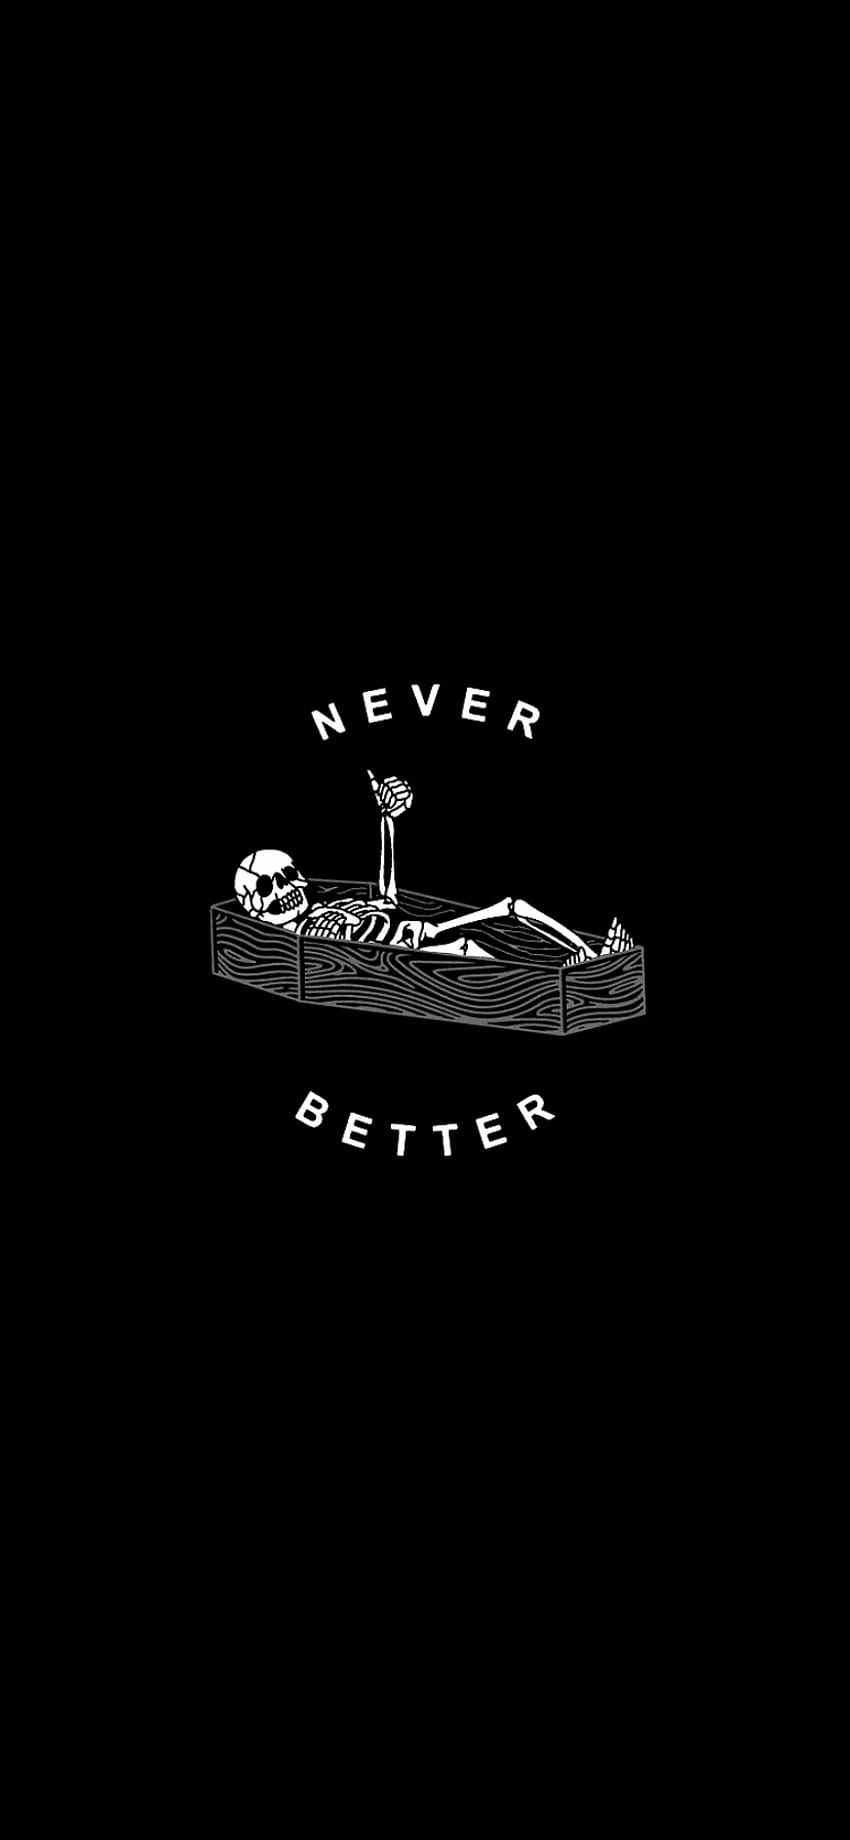 IPhone wallpaper with a skeleton in a coffin. - Apple Watch